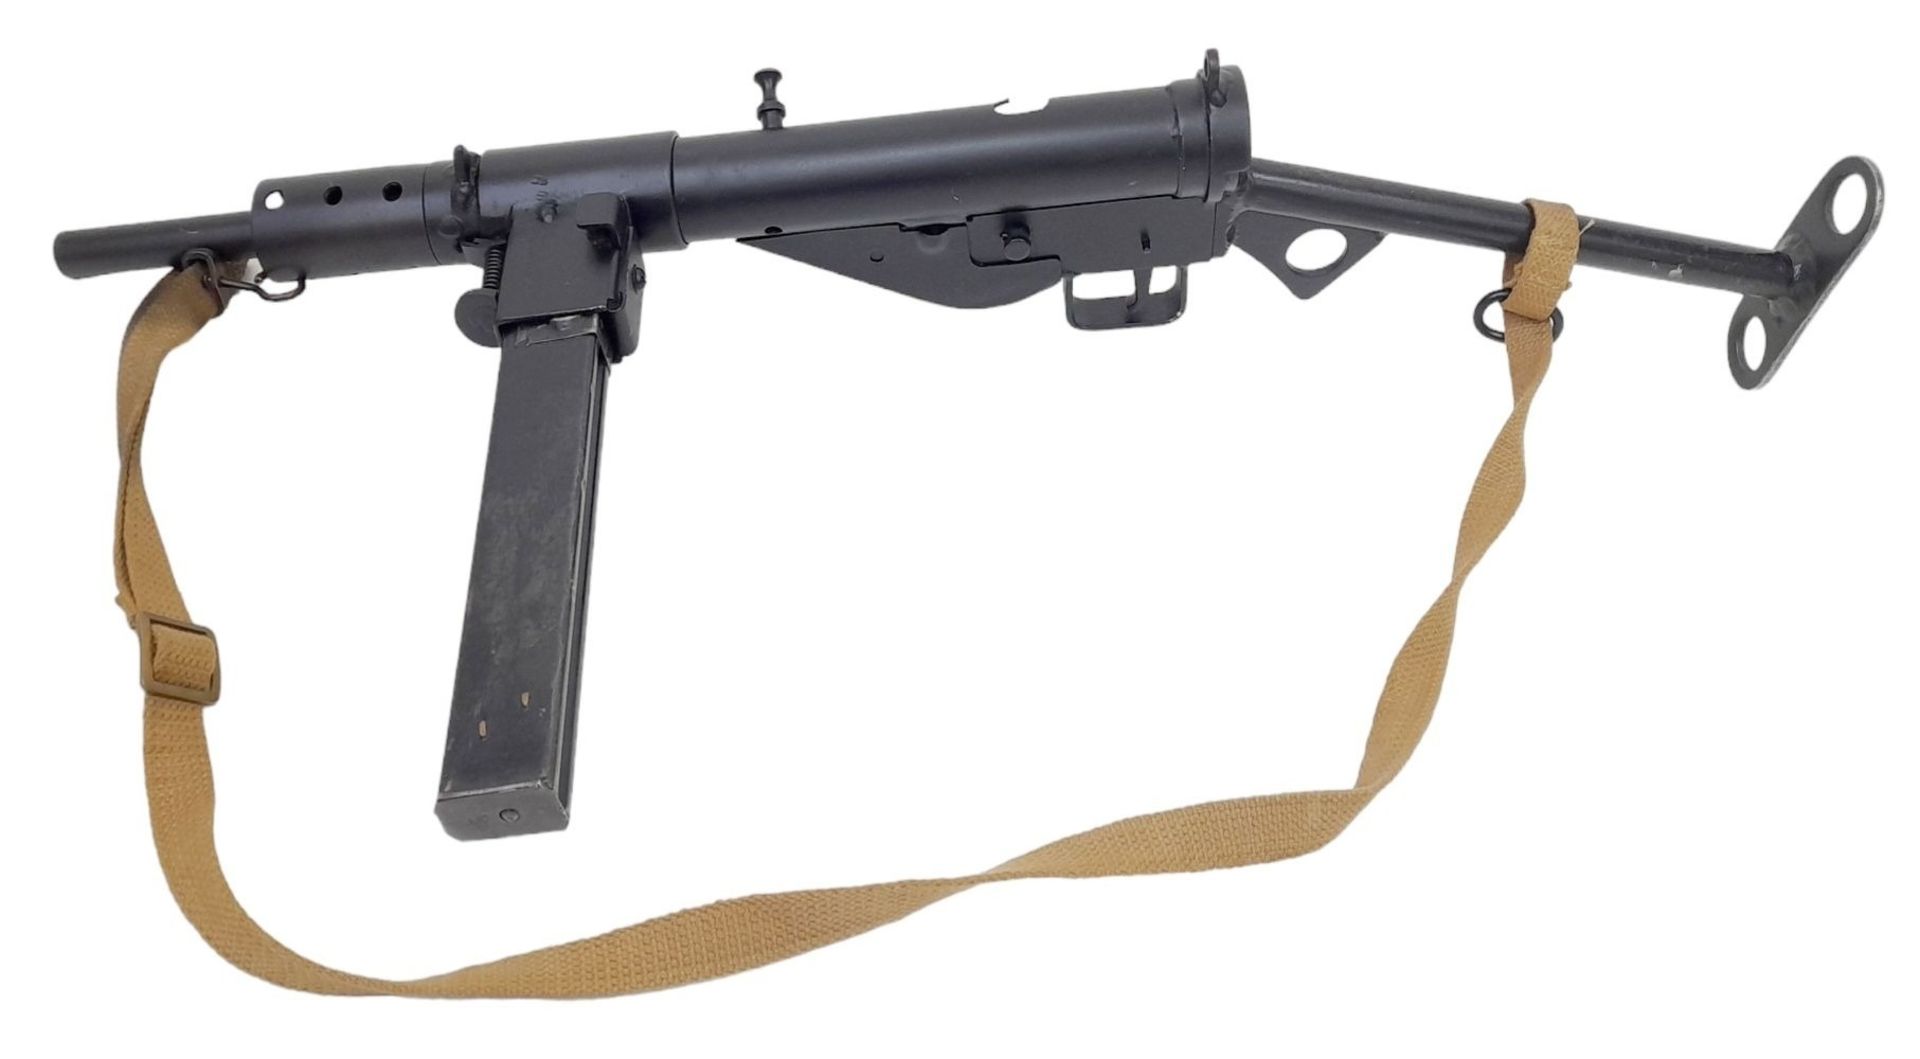 A Deactivated Maltby Sten Sub Machine Gun MKII. This British WW2 weapon was cheap and quick to